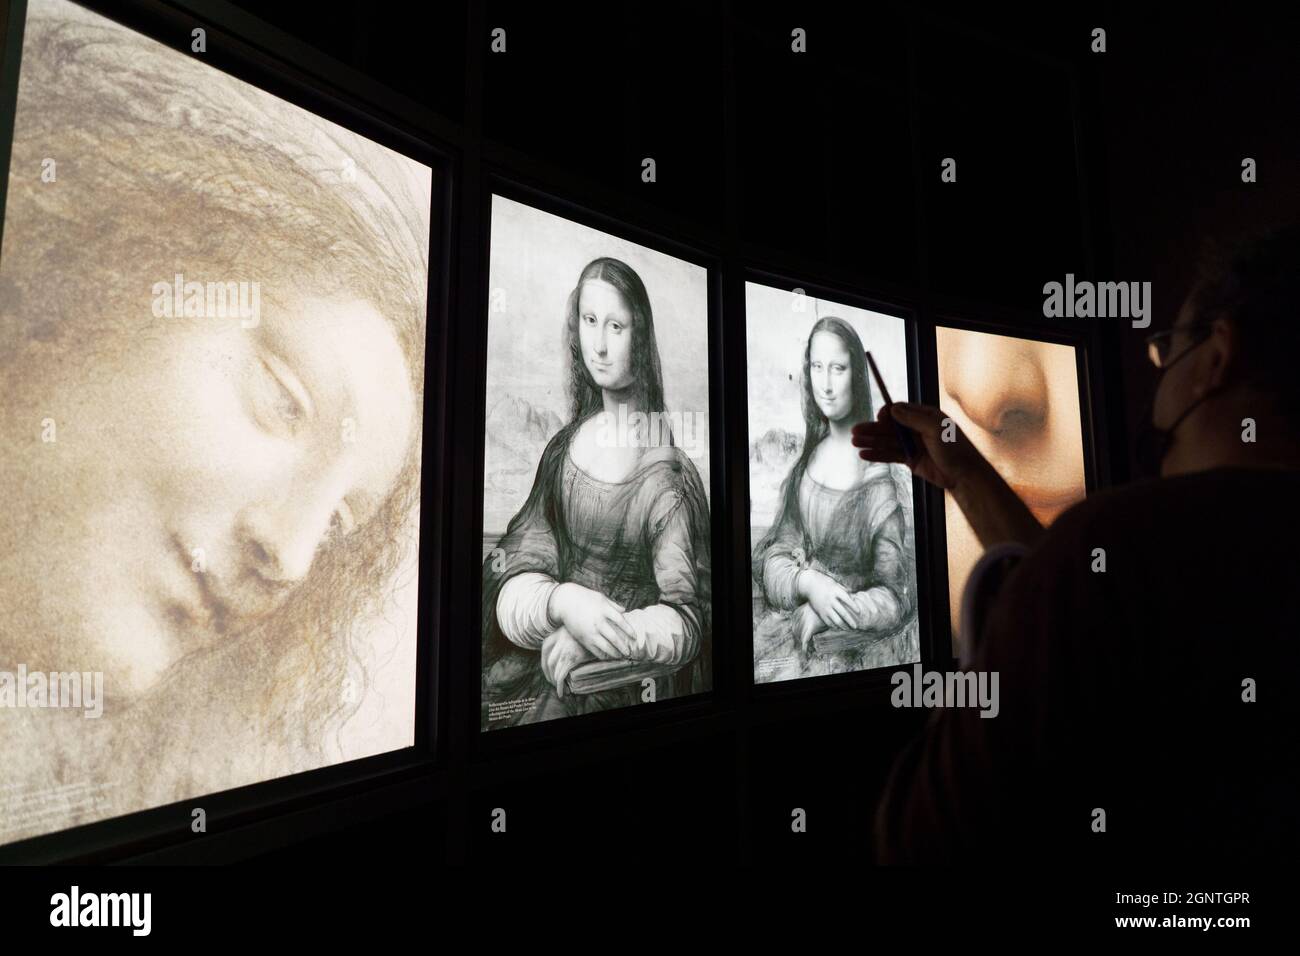 Paintings of Mona Lisa seen during the Presentation of the Exhibition of Leonardo Da Vinci at the Museo Nacional del Prado.The Museo Nacional del Prado is presenting the latest research on Leonardo's closest circle, Leonardo and the copy of the Mona Lisa. New approaches to the artist's studio practices is the first monographic exhibition in Spain to study the copies and versions made in Leonardo's studio during his lifetime, works that were based on the master's prototypes and authorized by him. On display at the Museo Nacional del Prado until 23 January in Room D of the Jerónimos Building, th Stock Photo